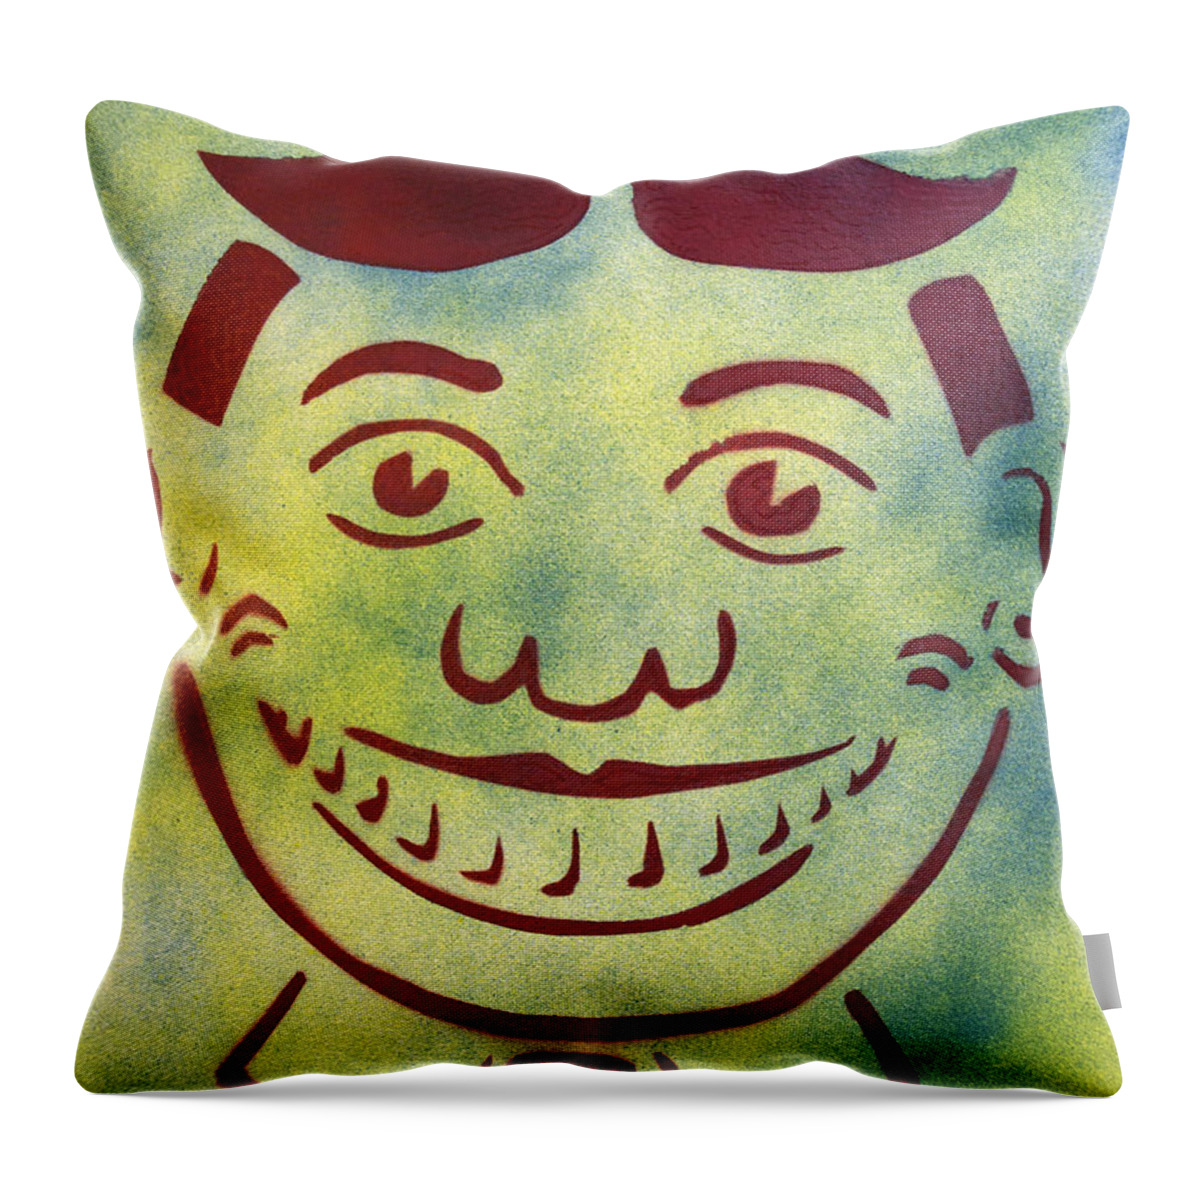 Tillie Of Asbury Park Throw Pillow featuring the painting Red on yellow and blue Tillie by Patricia Arroyo